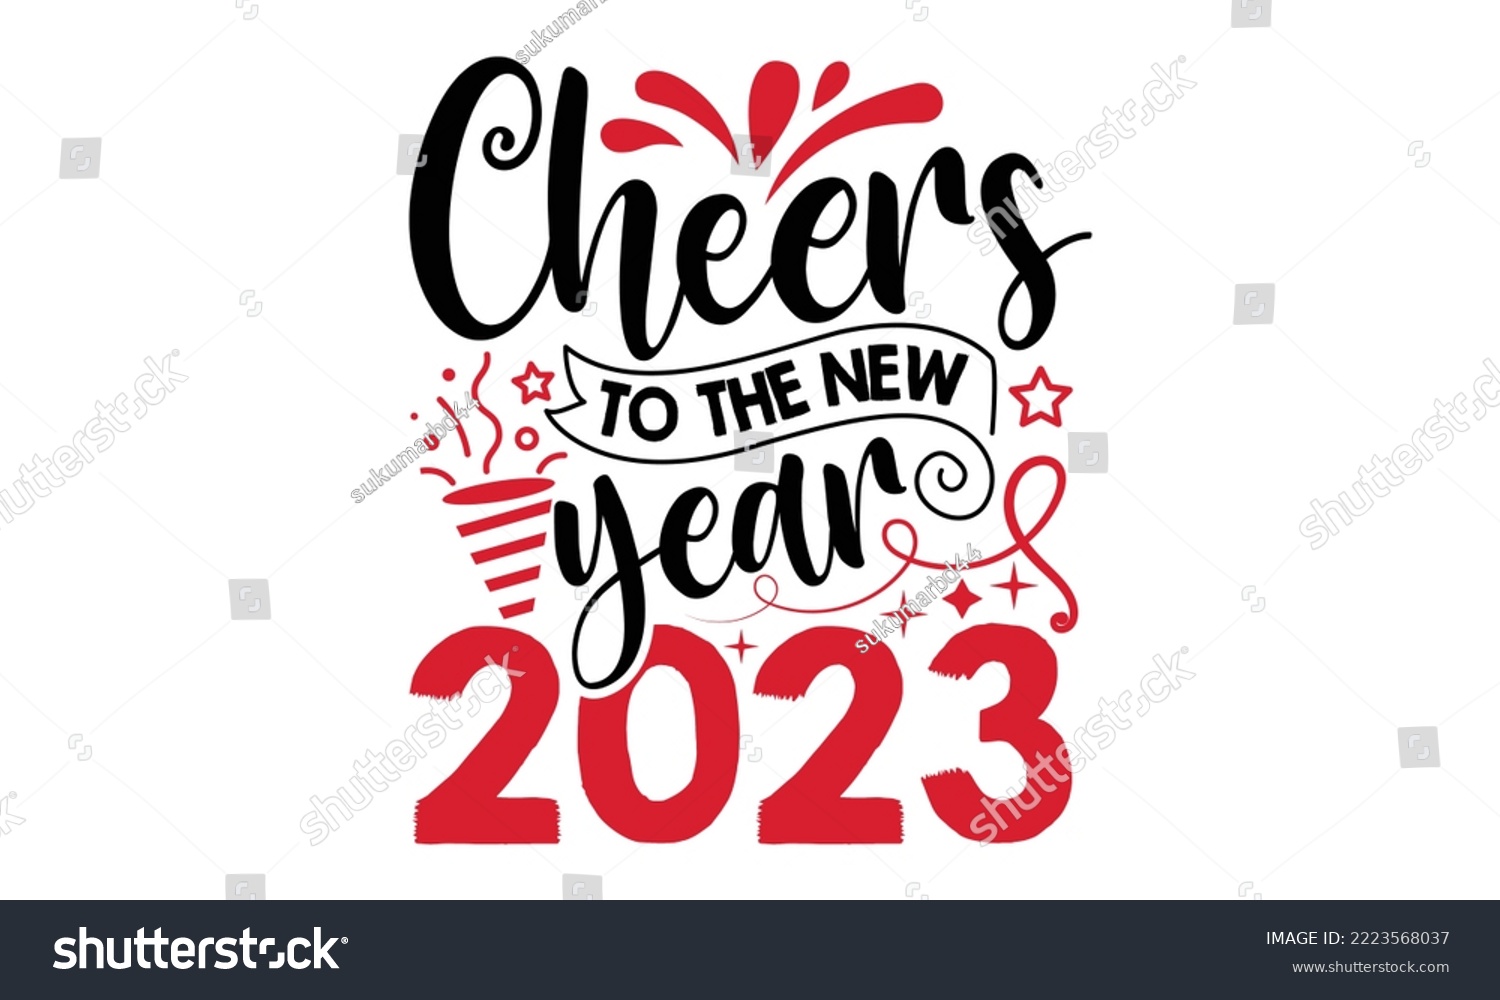 SVG of Cheers To The New Year 2023 - Happy New Year SVG Design, Handmade calligraphy vector illustration, Illustration for prints on t-shirt and bags, posters svg